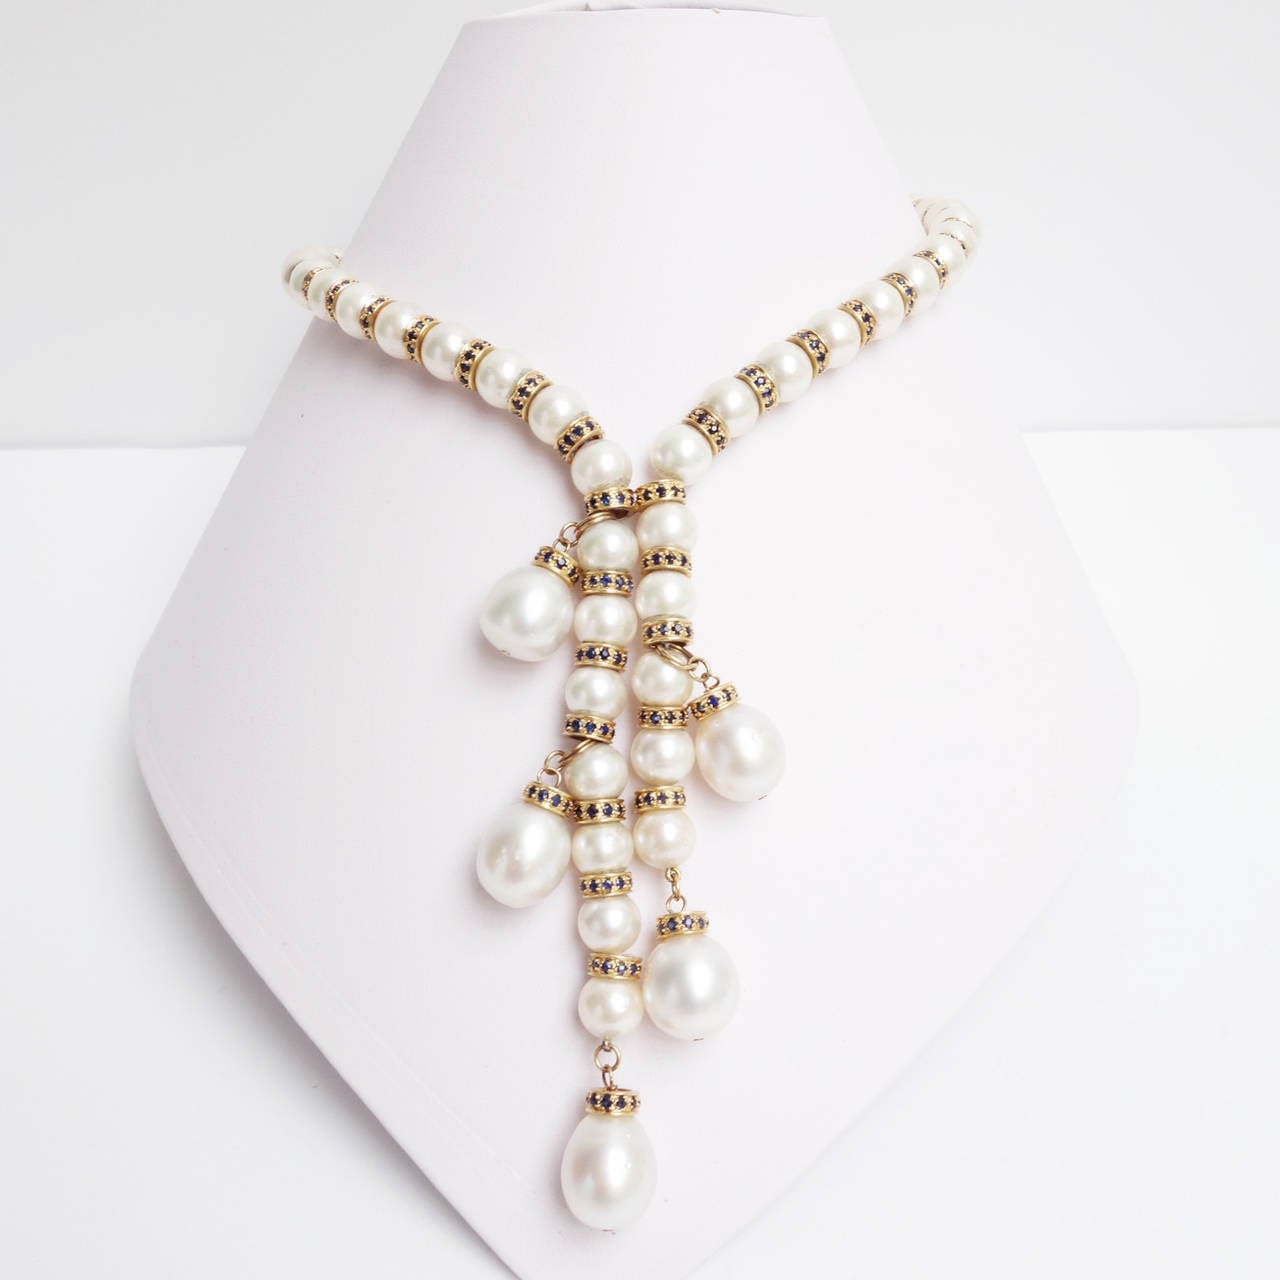 One of a kind white South Sea pearl fringe necklace, composed of fifty 9mm round pearls alternating with 14K yellow gold blue Sapphire set spacers. There are five off-round to baroque shape 12mm to 13mm pearls dangling from the strand. The pearls